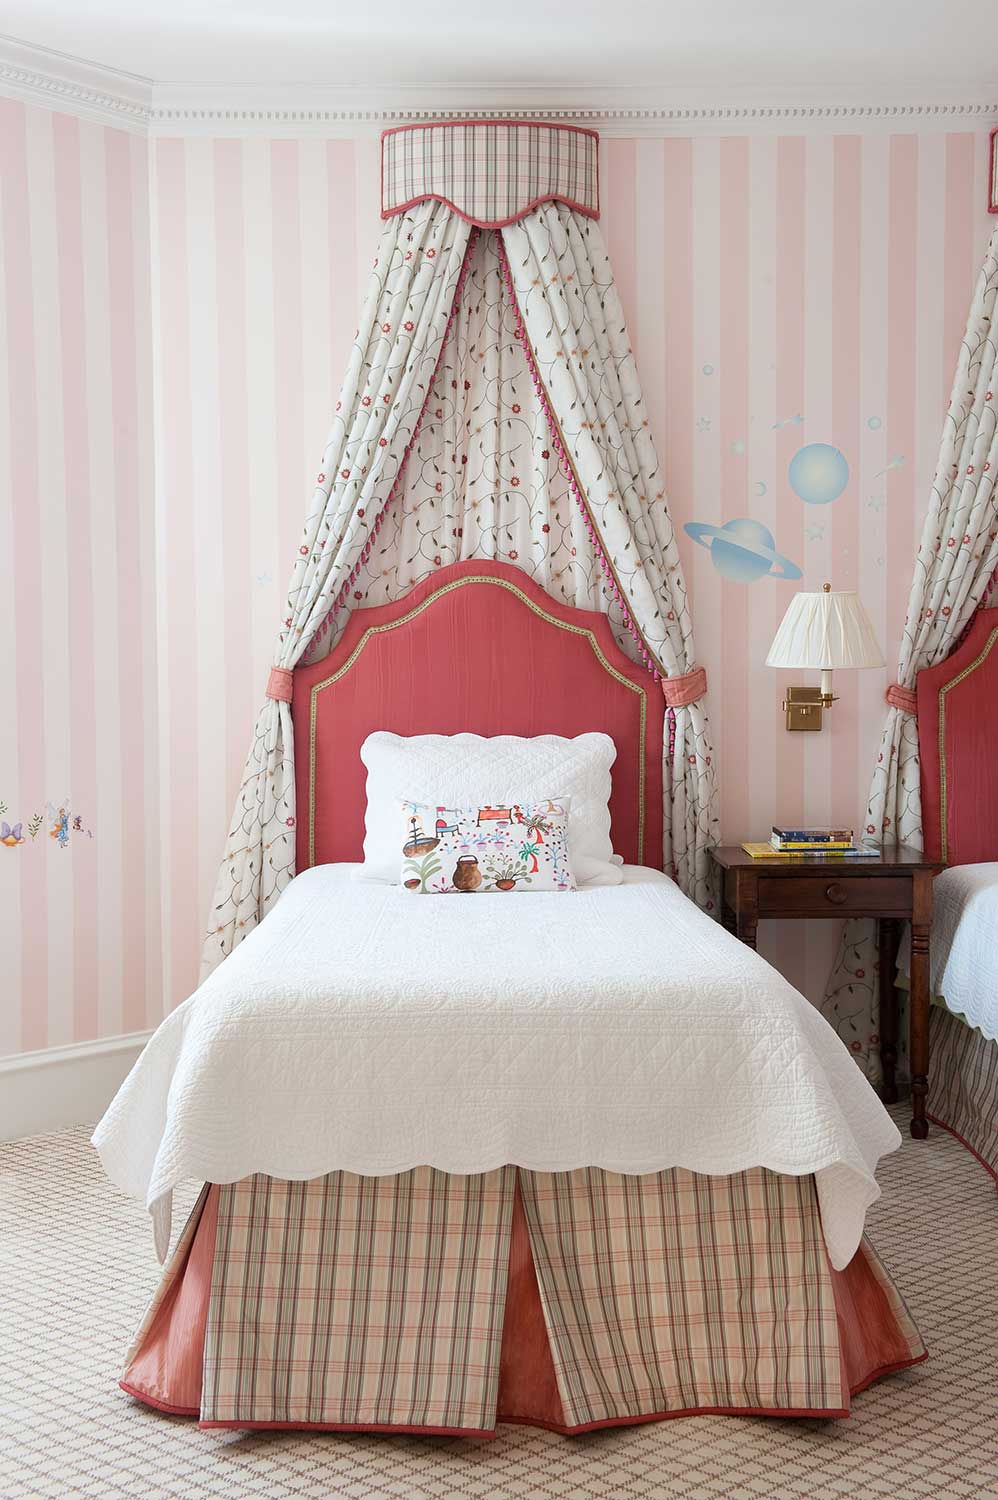 decorative_bed_tent_for_girls_room.jpg